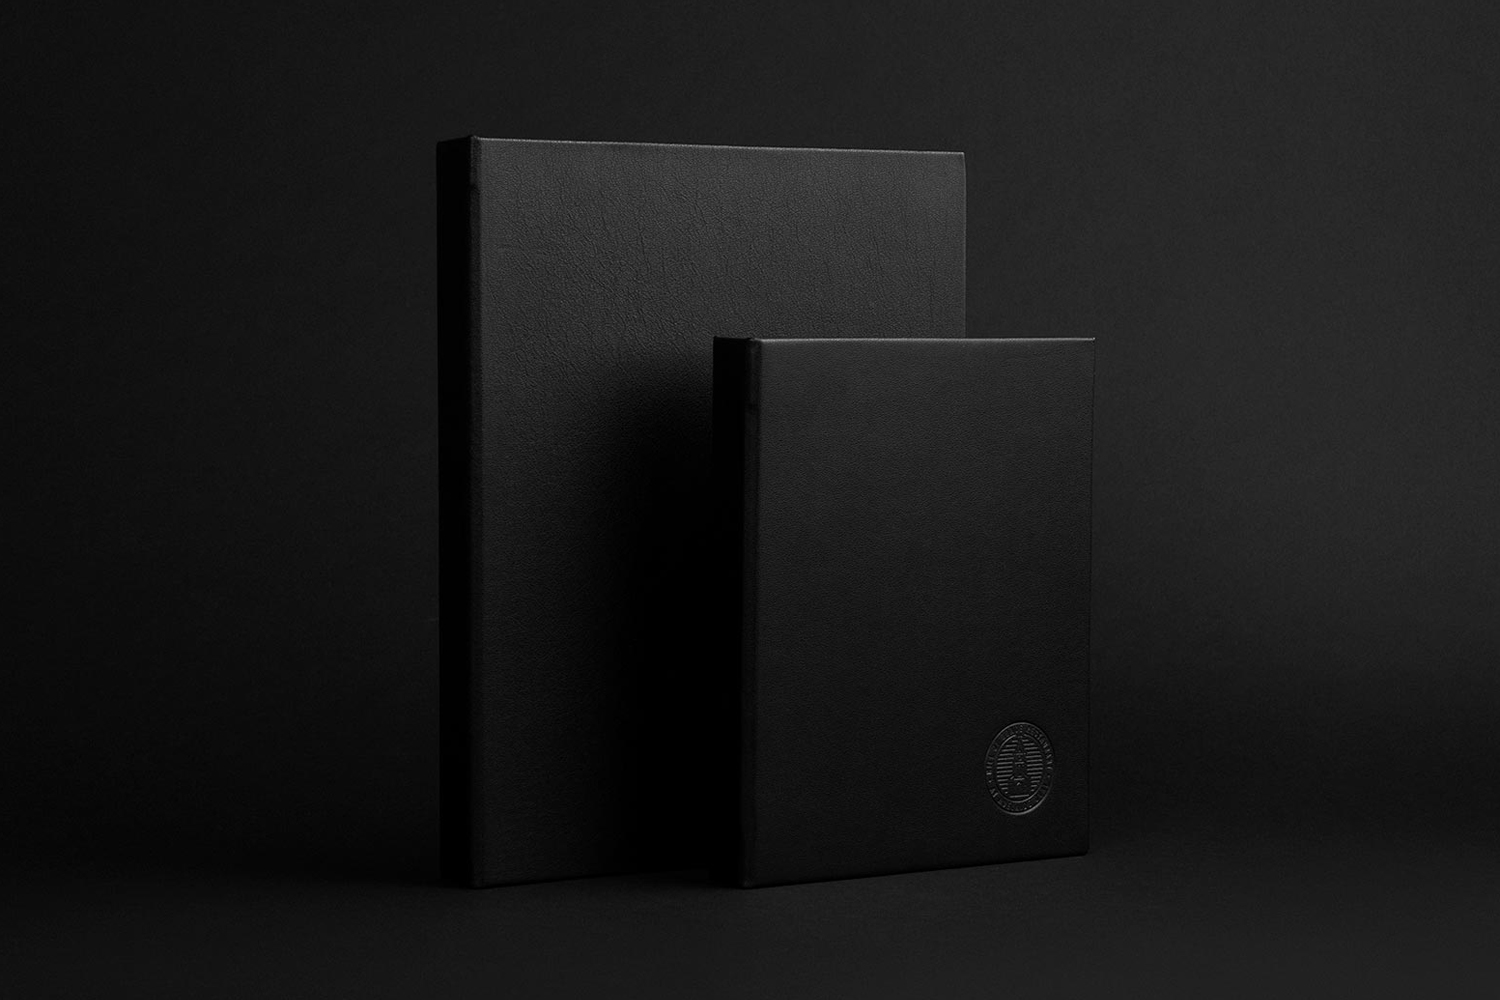 Brand identity and menu design by Band for restaurant Hill Of Grace at Adelaide Oval